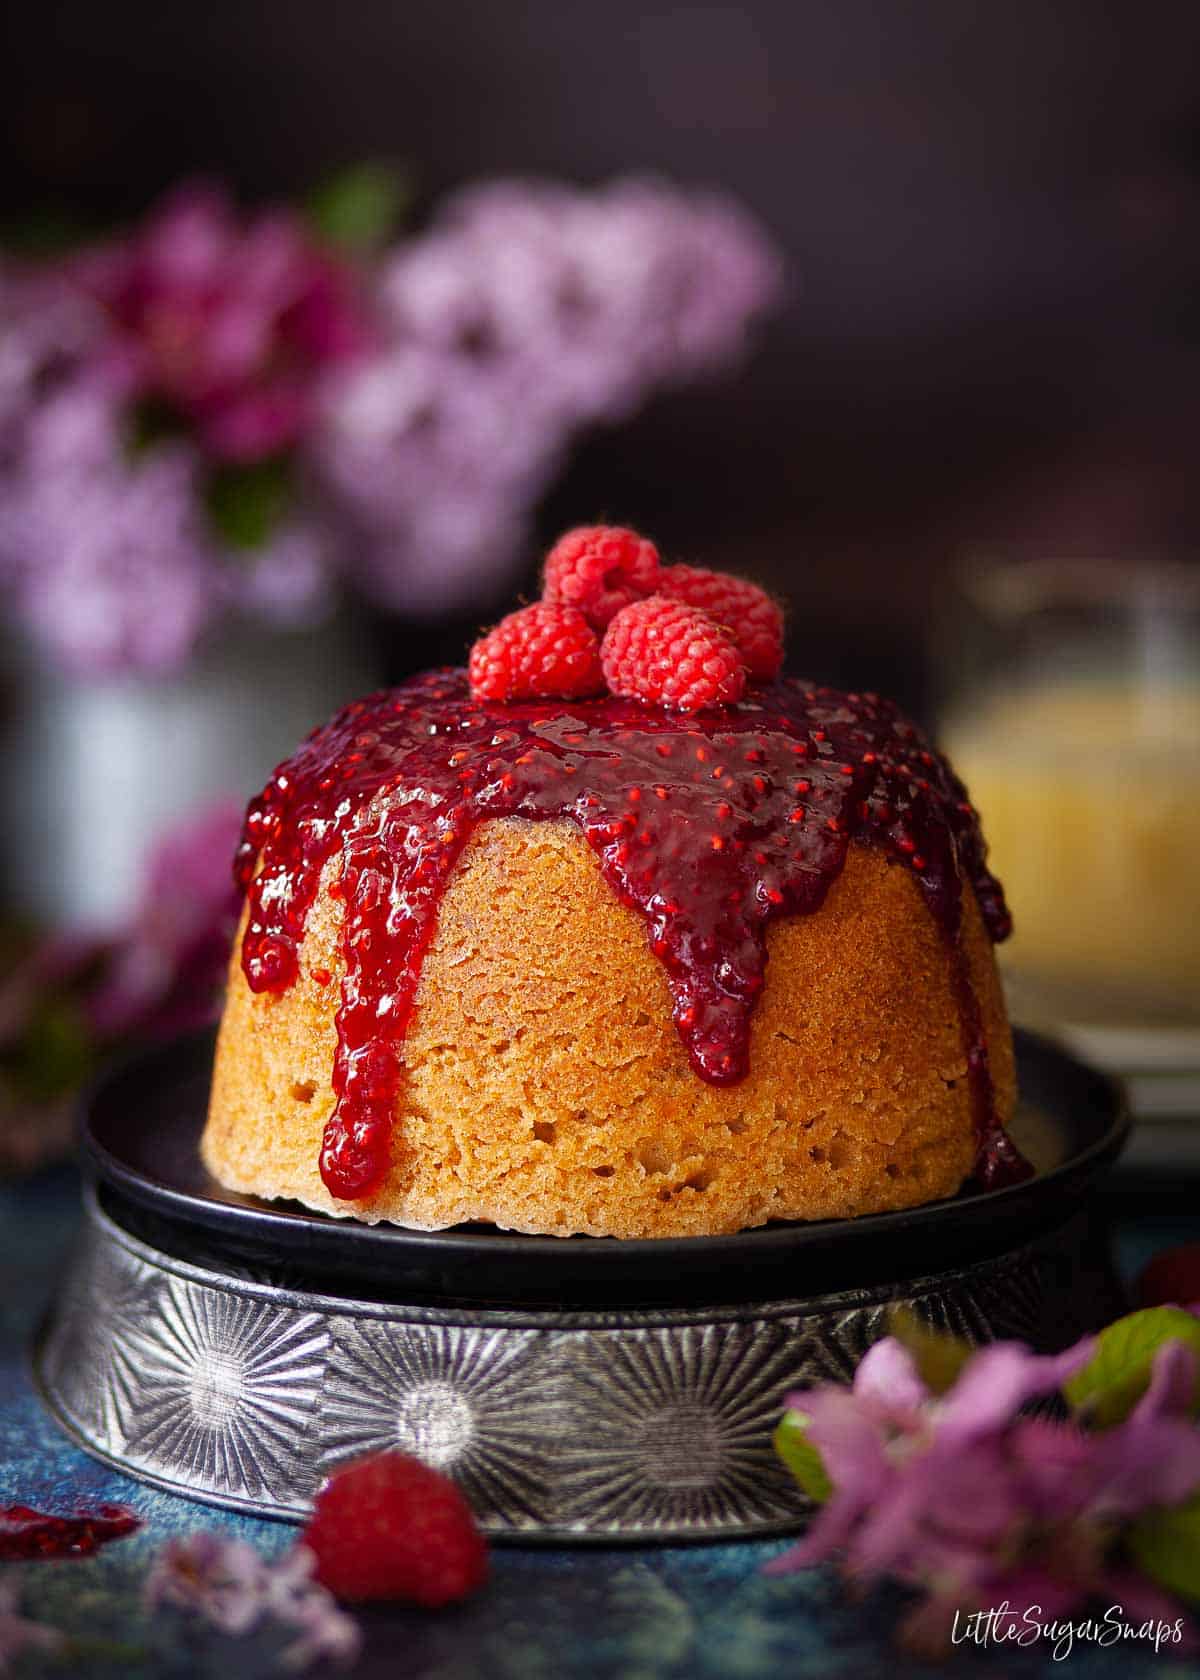 Steamed Jam and Sponge Pudding topped with fresh raspberries.